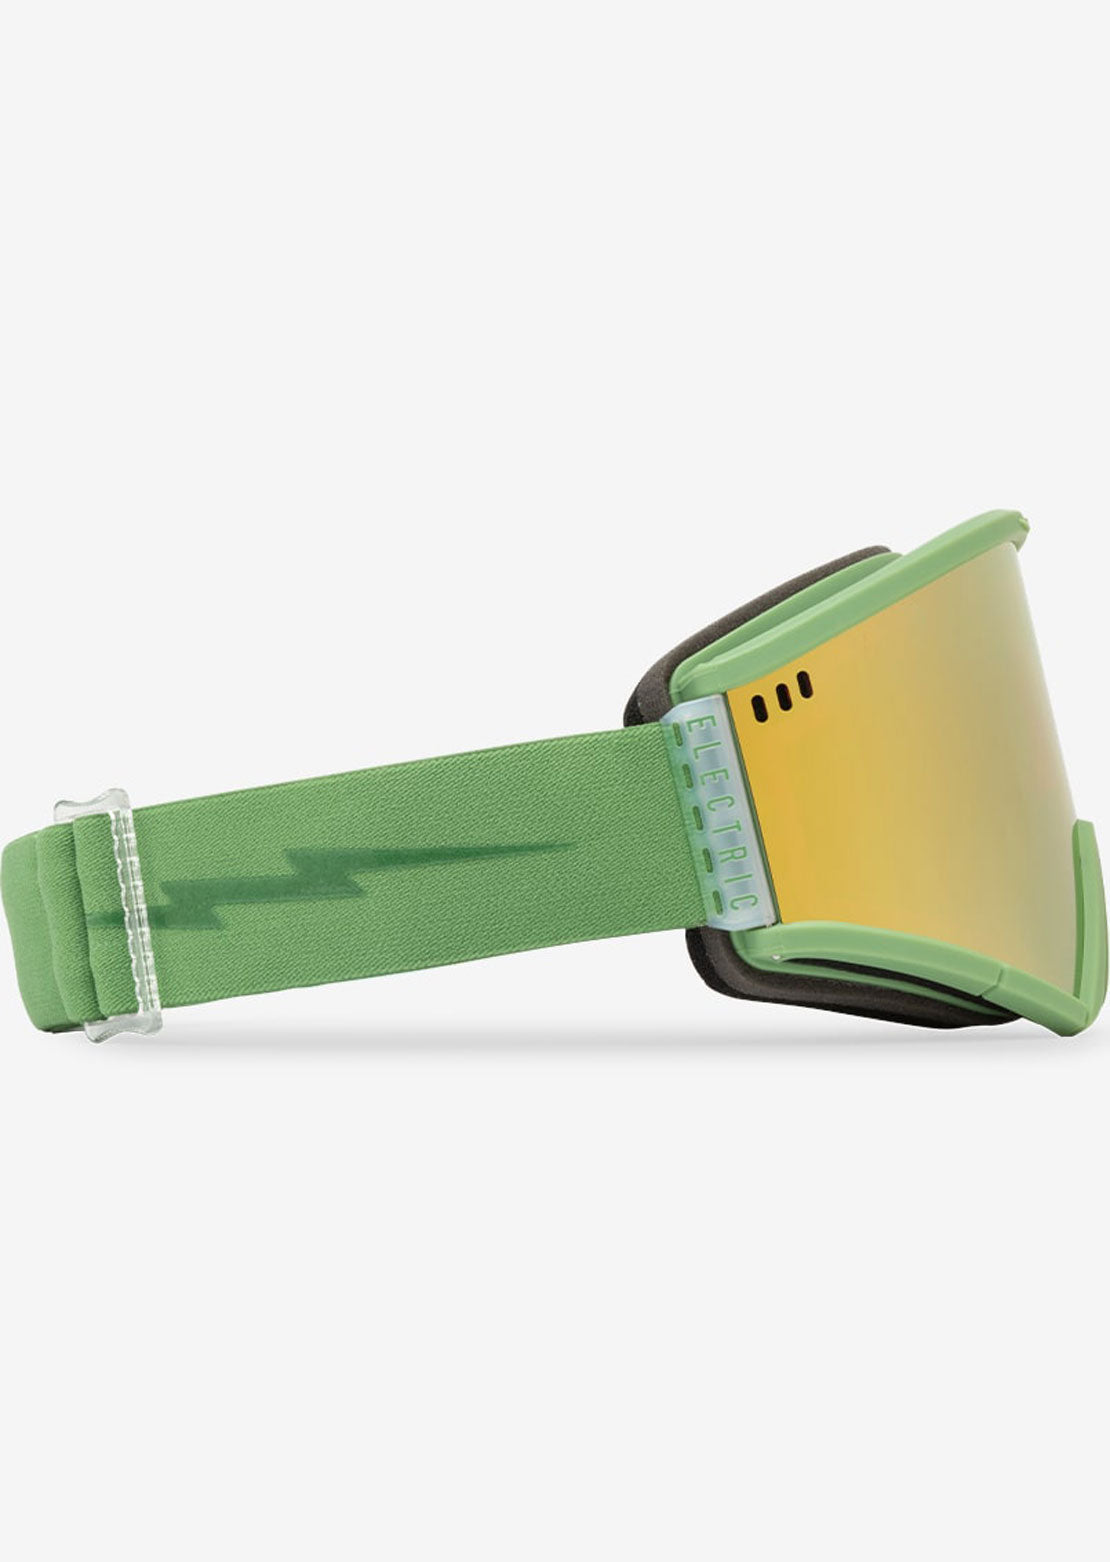 Electric Roteck Snow Goggles Matte Moss/Auburn Gold